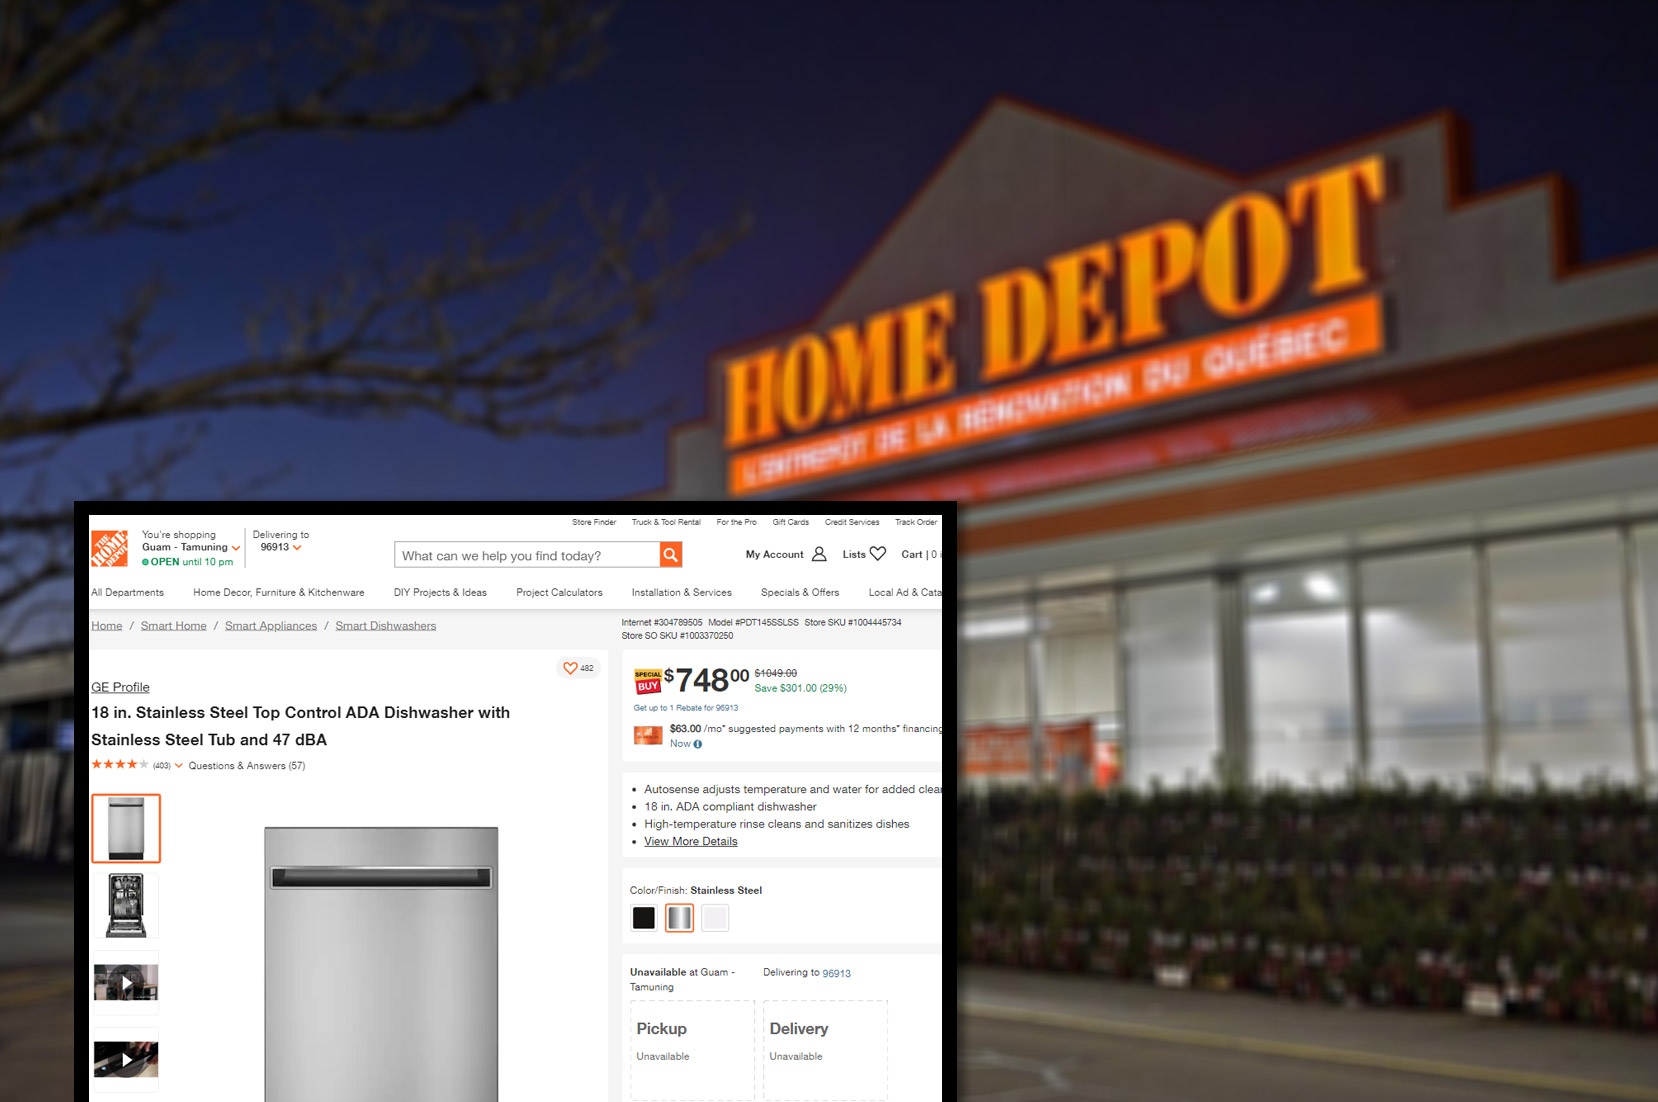 homedepot-comproduct-pricing-information-and-image-scraping-services